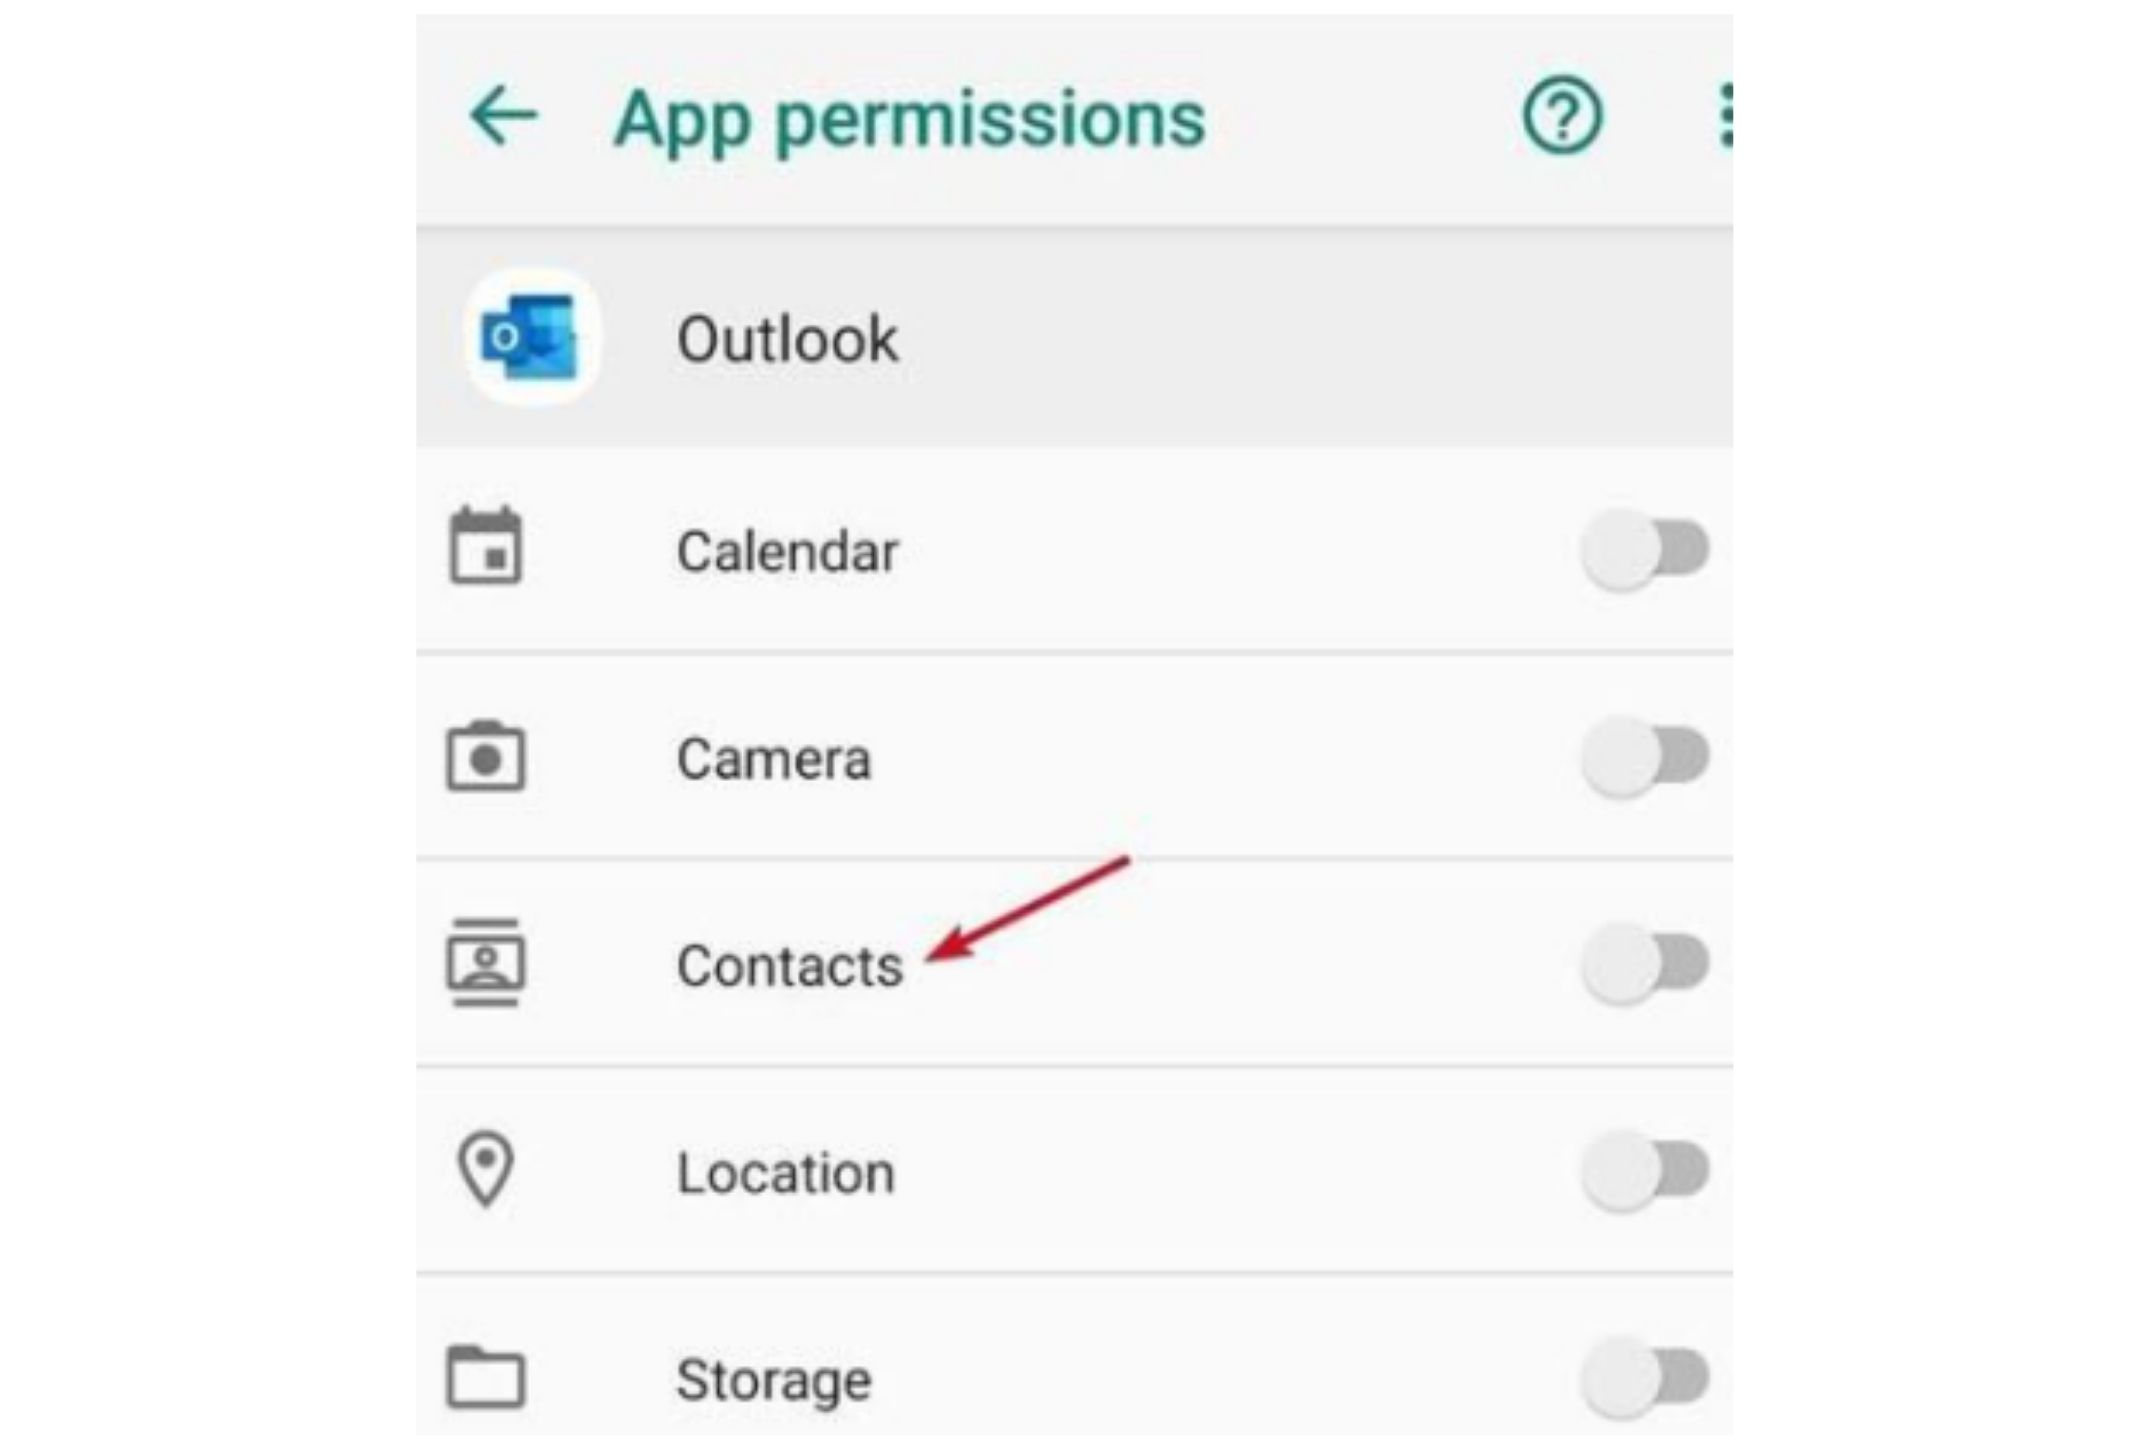 Syncing Contacts with an Android Application